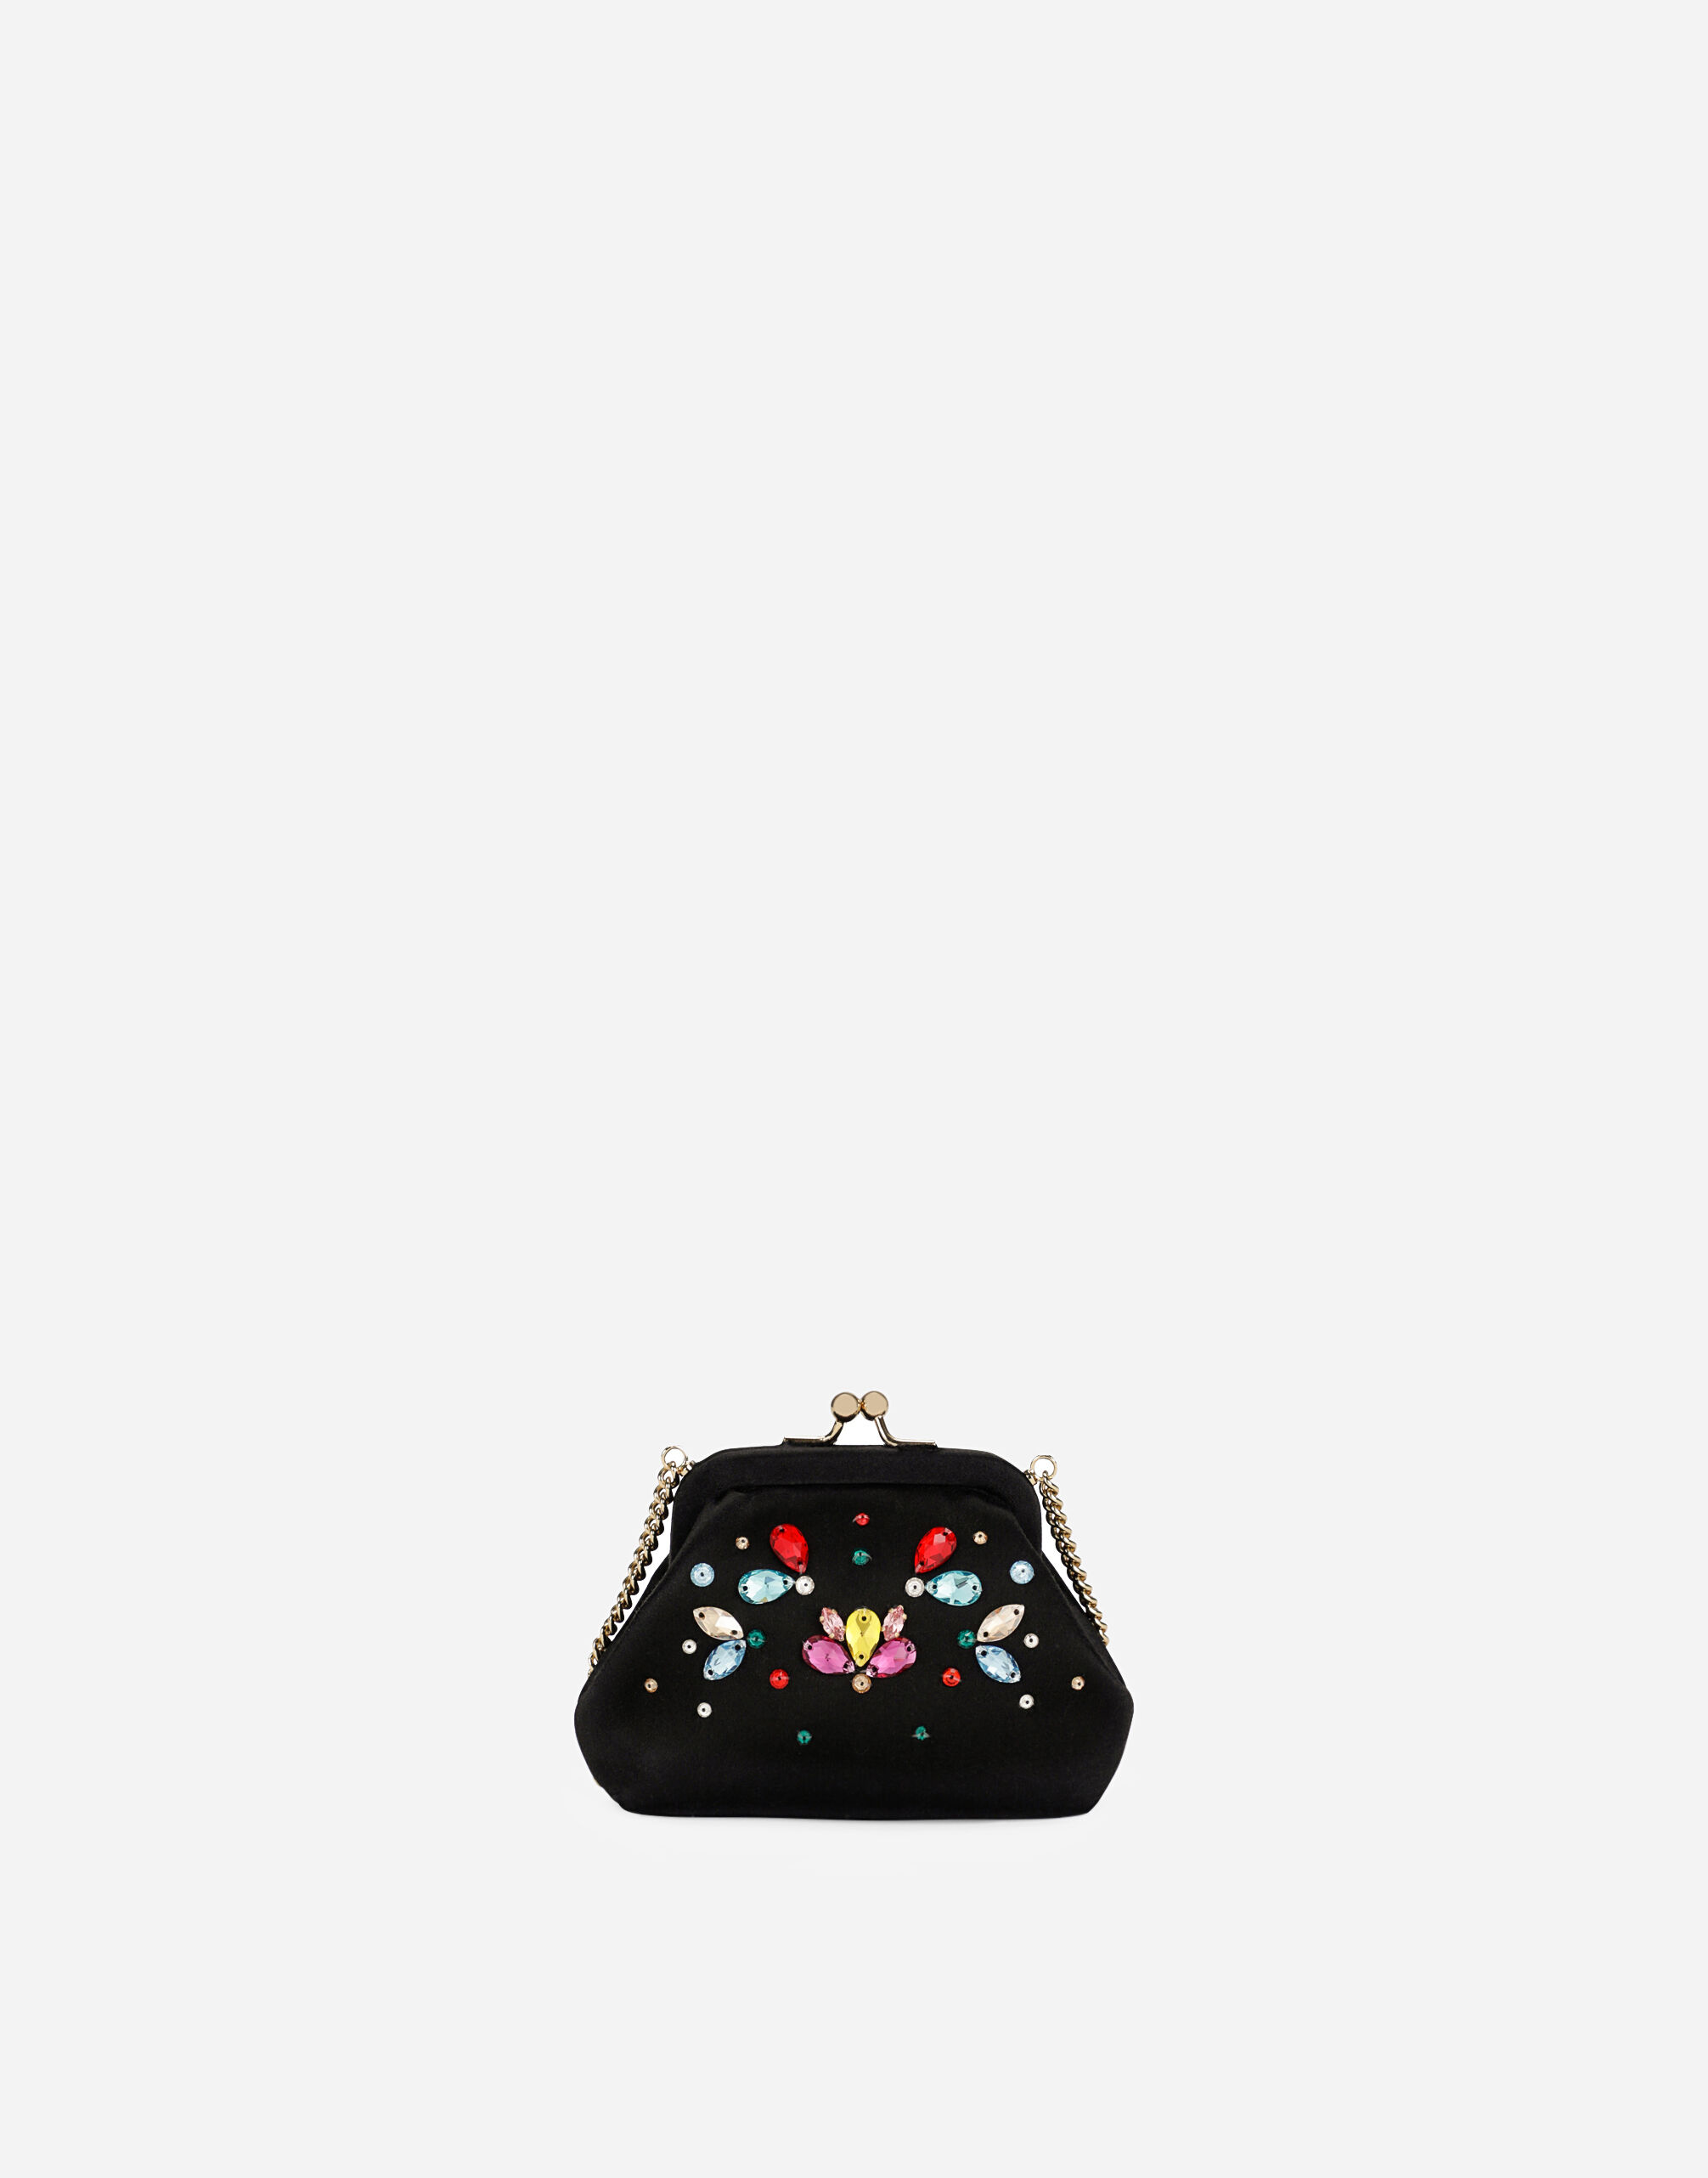 Dolce & Gabbana Satin shoulder bag with multi-colored crystals Pink EE0062A1471